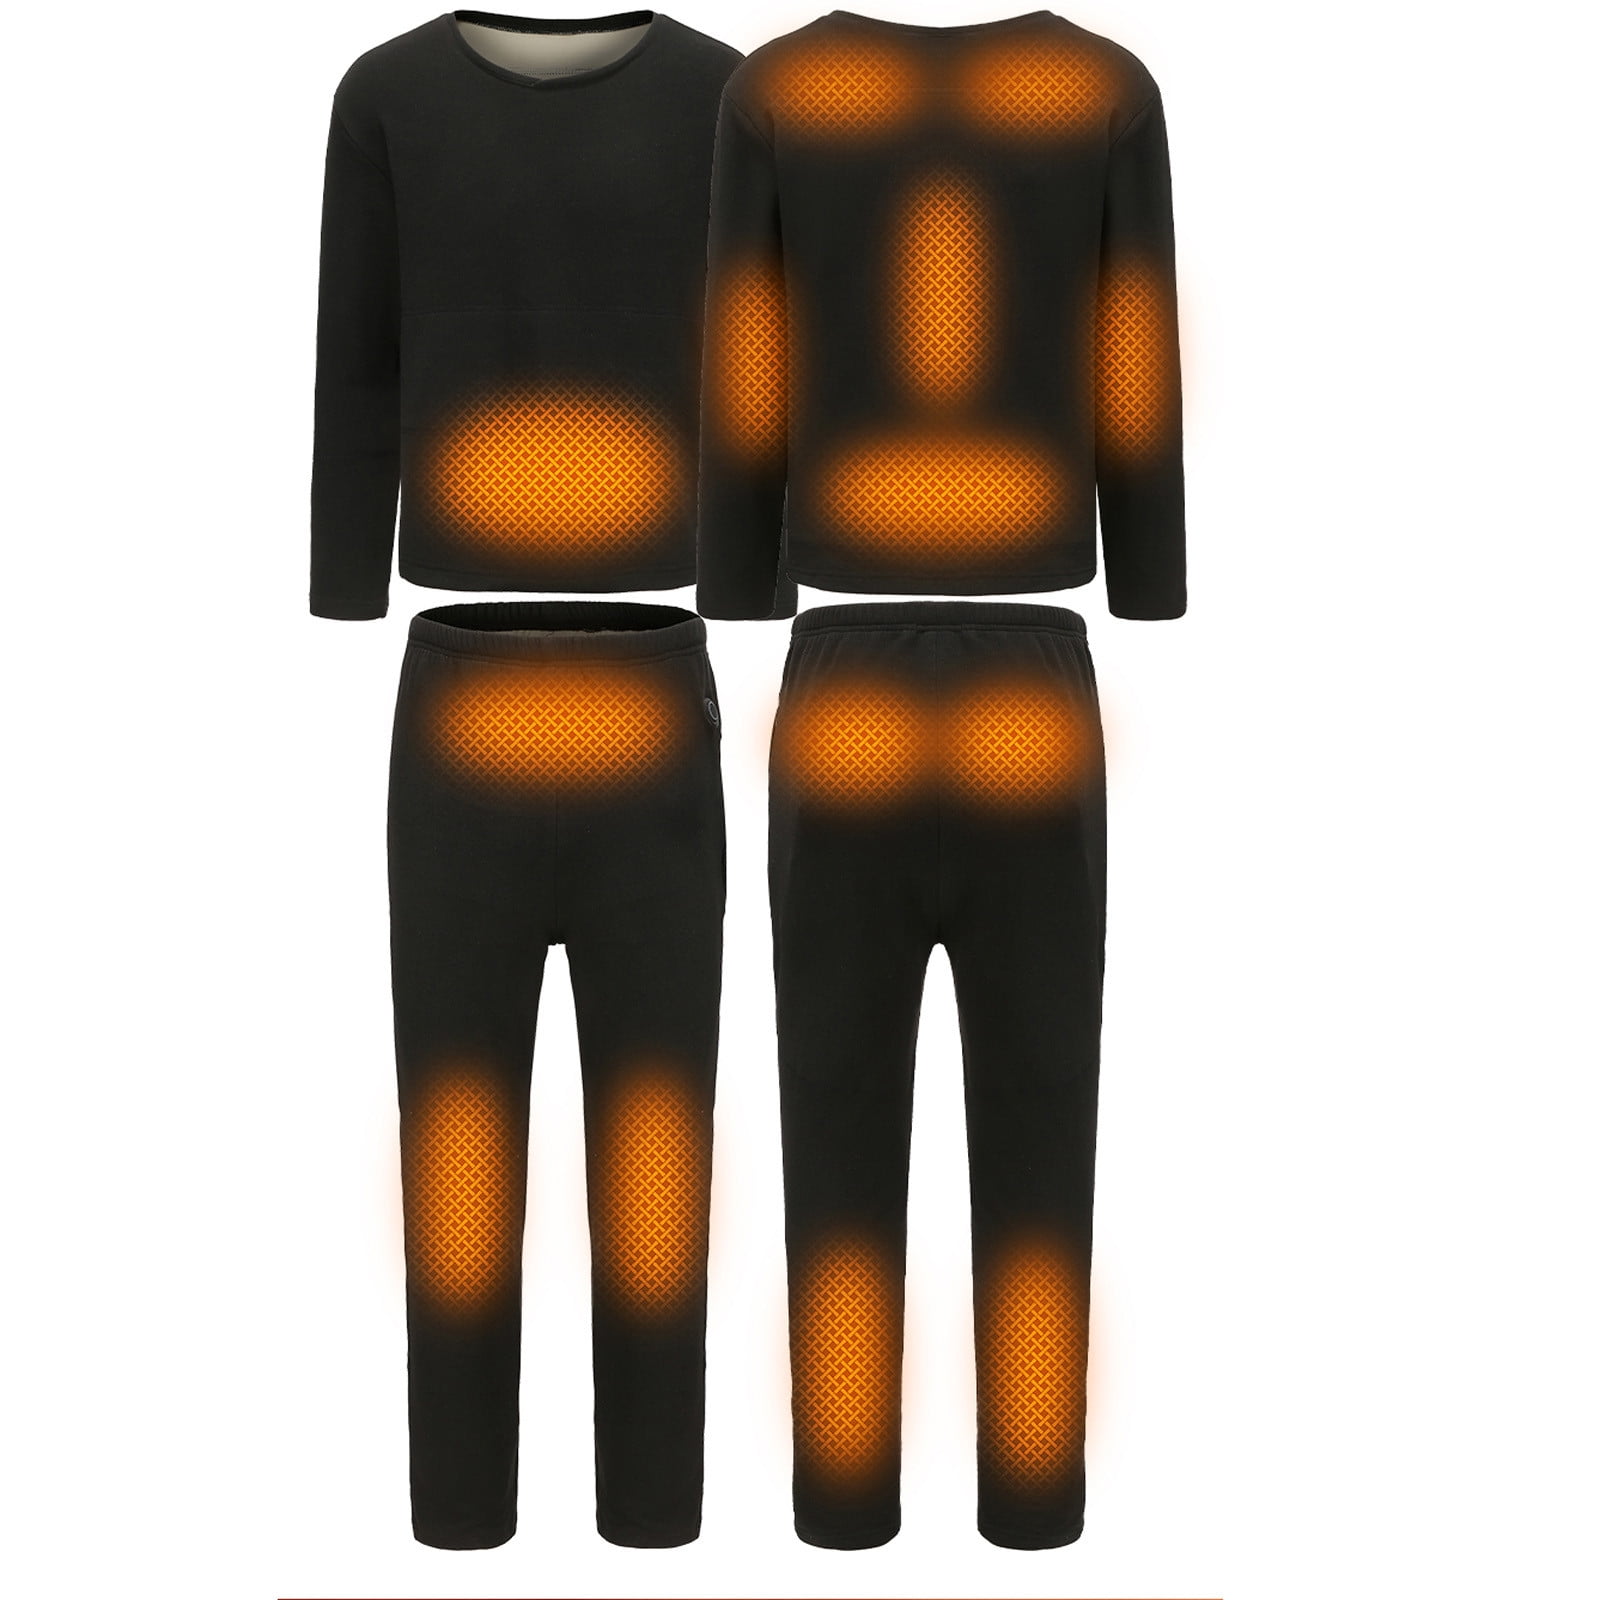 Thermal Union Suit